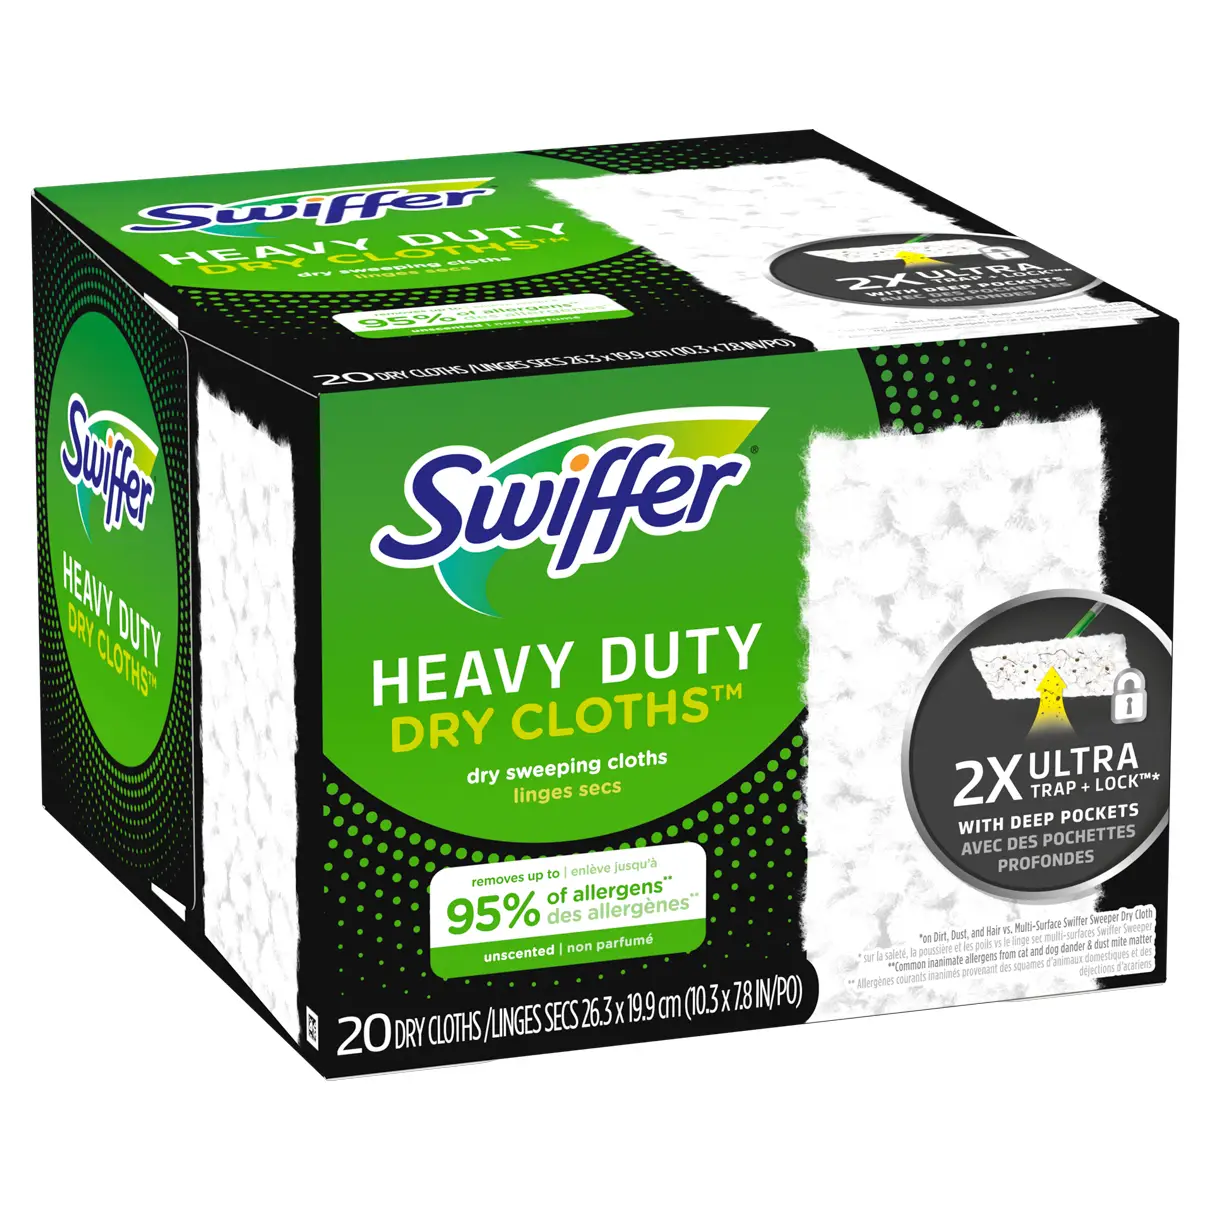 Swiffer® Sweeper™ Heavy Duty Multi-Surface Dry Cloth Refills for Floor Sweeping and Cleaning